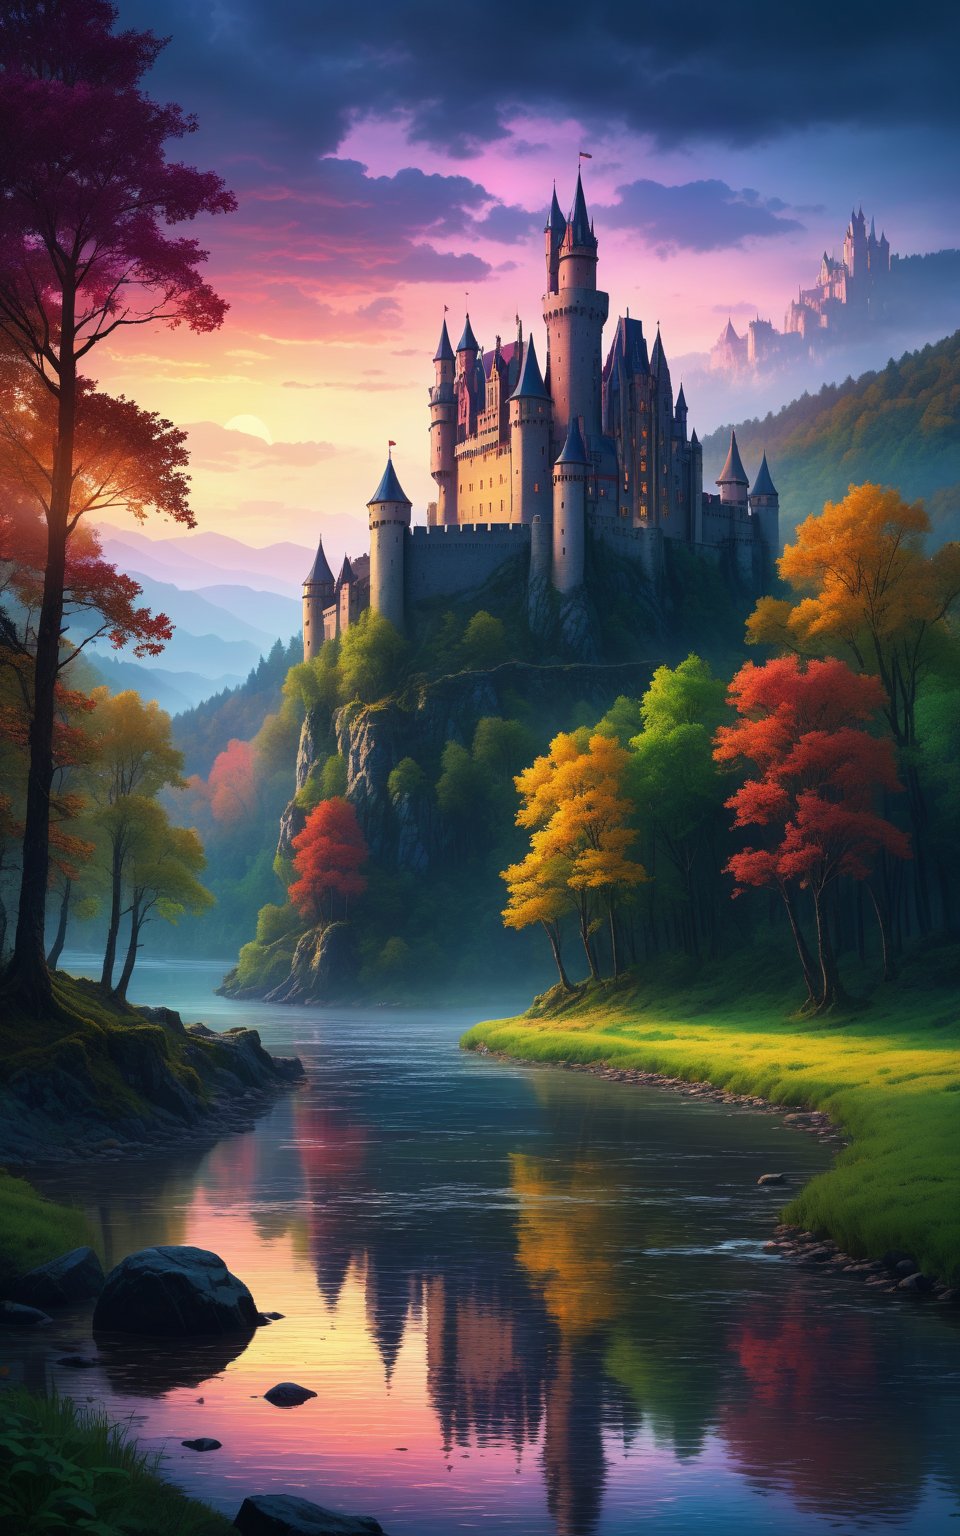 colorful scene of a castle in the forest beside a river in the evening. It's very gloomy and mysterious. The castle is shown in the foreground with the river in the background,concept art